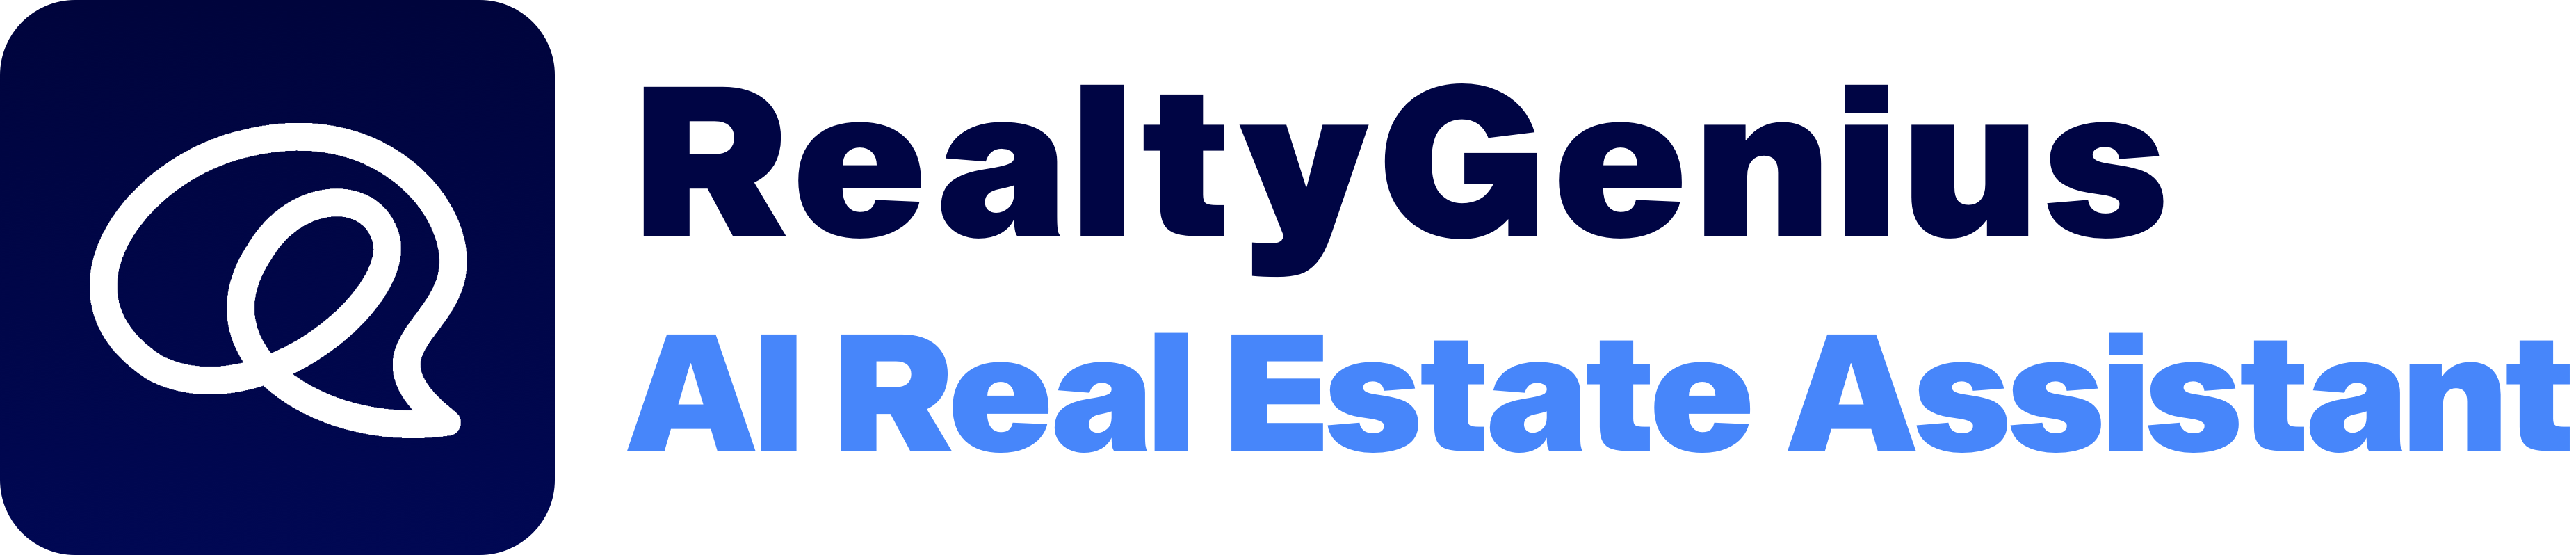 RealtyGenius.AI - Your AI-Powered Real Estate Assistant